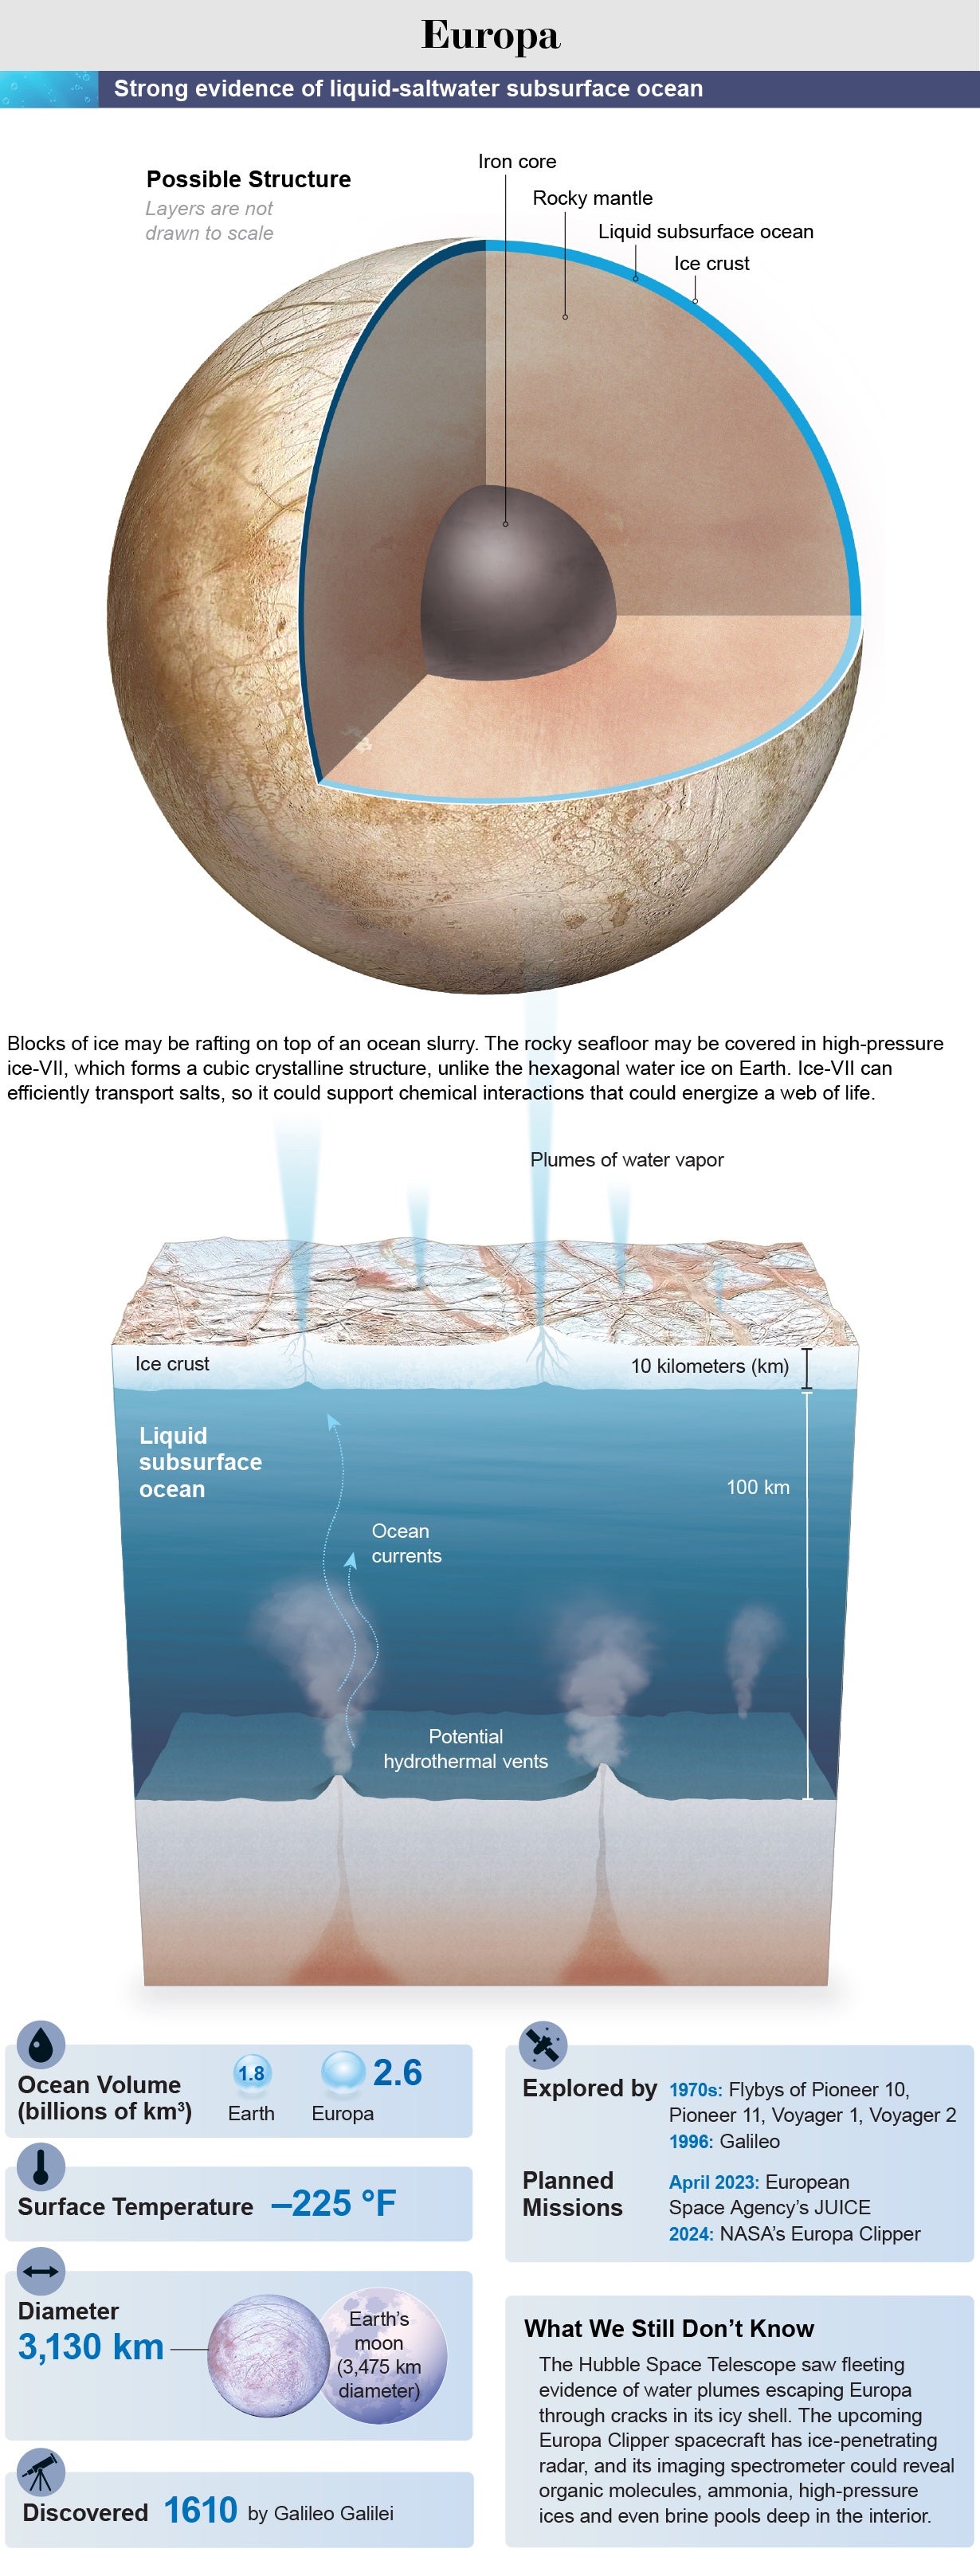 View inside Europa—showing an iron core, rocky mantle, liquid subsurface ocean, and ice crust—paired with a cross section of the ocean and moon statistics.